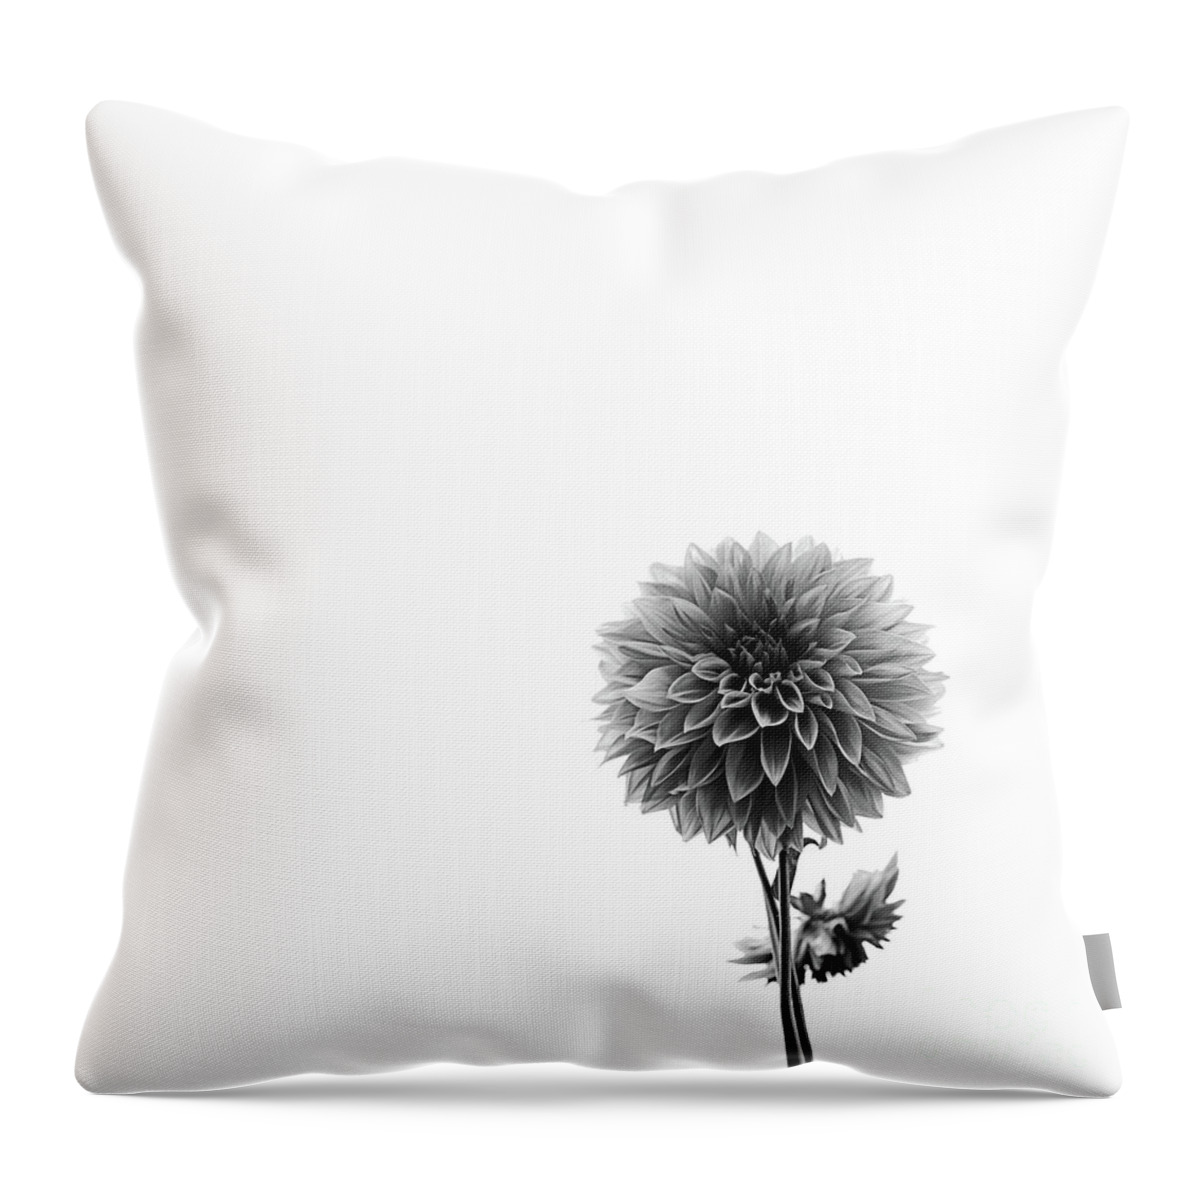 Dahlia Throw Pillow featuring the photograph Dahlia In Black And White 2 by Mark Alder